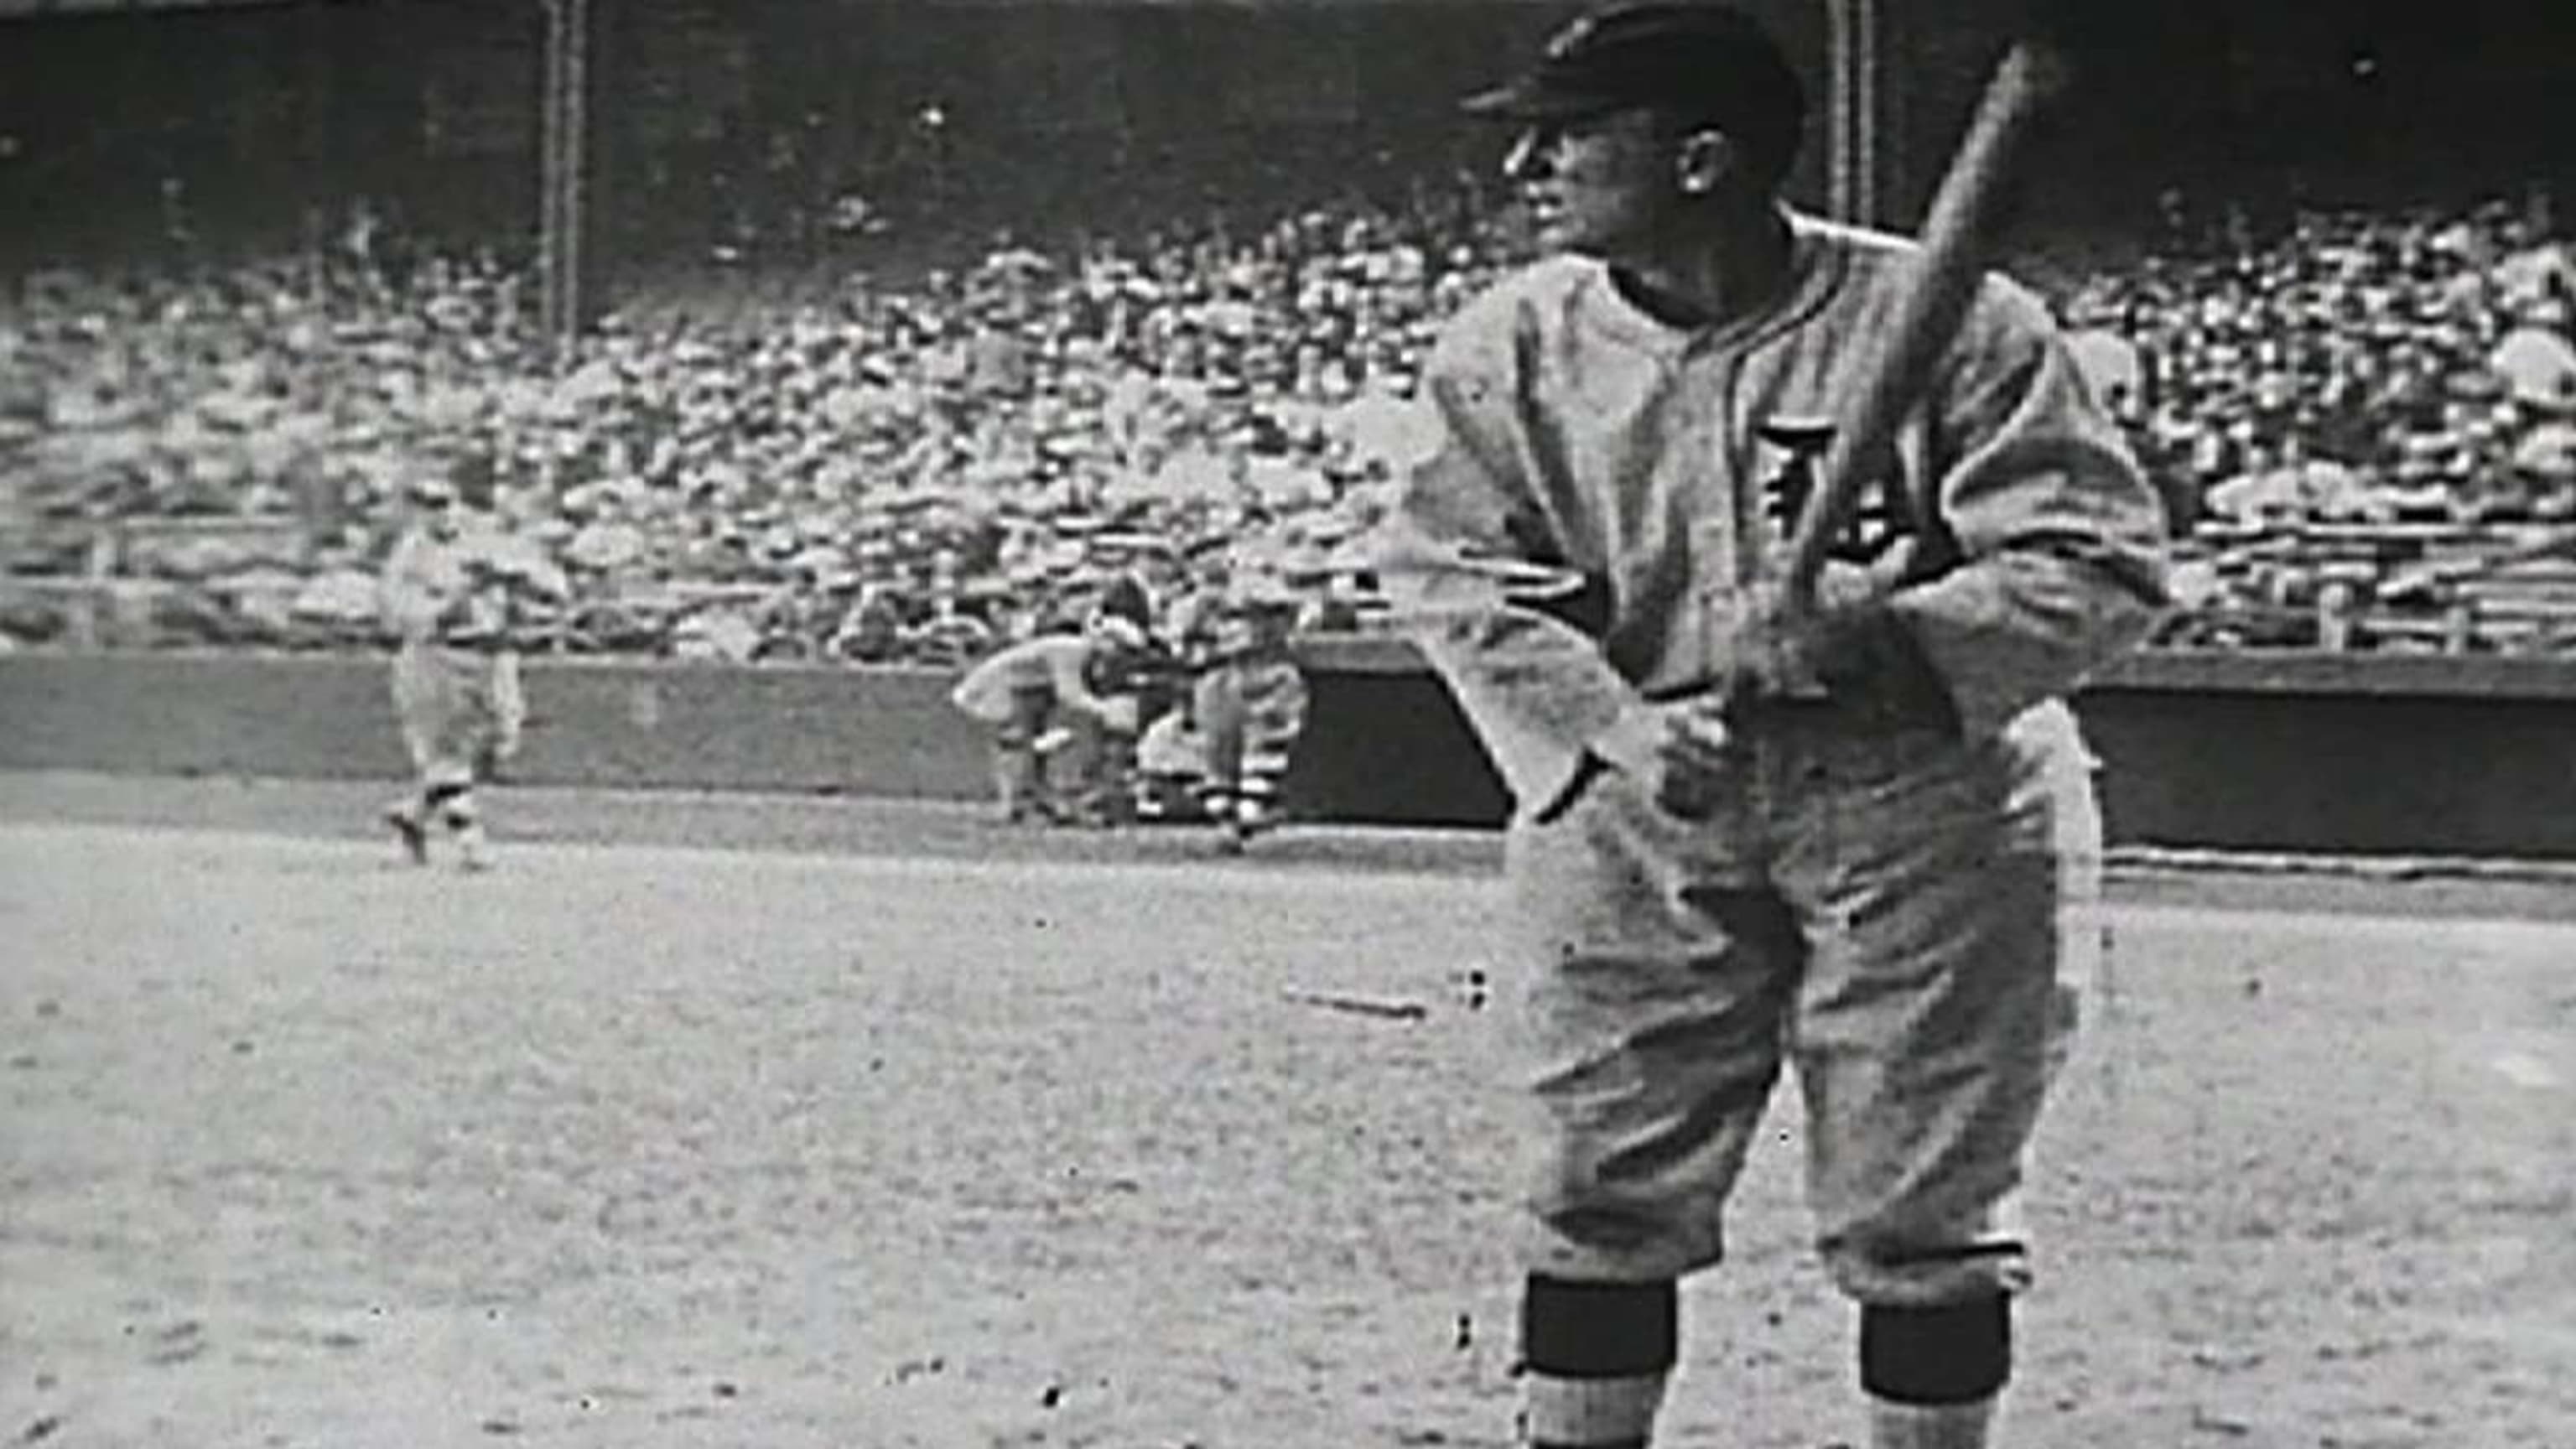 The lighter side of Ty Cobb - in vintage photos